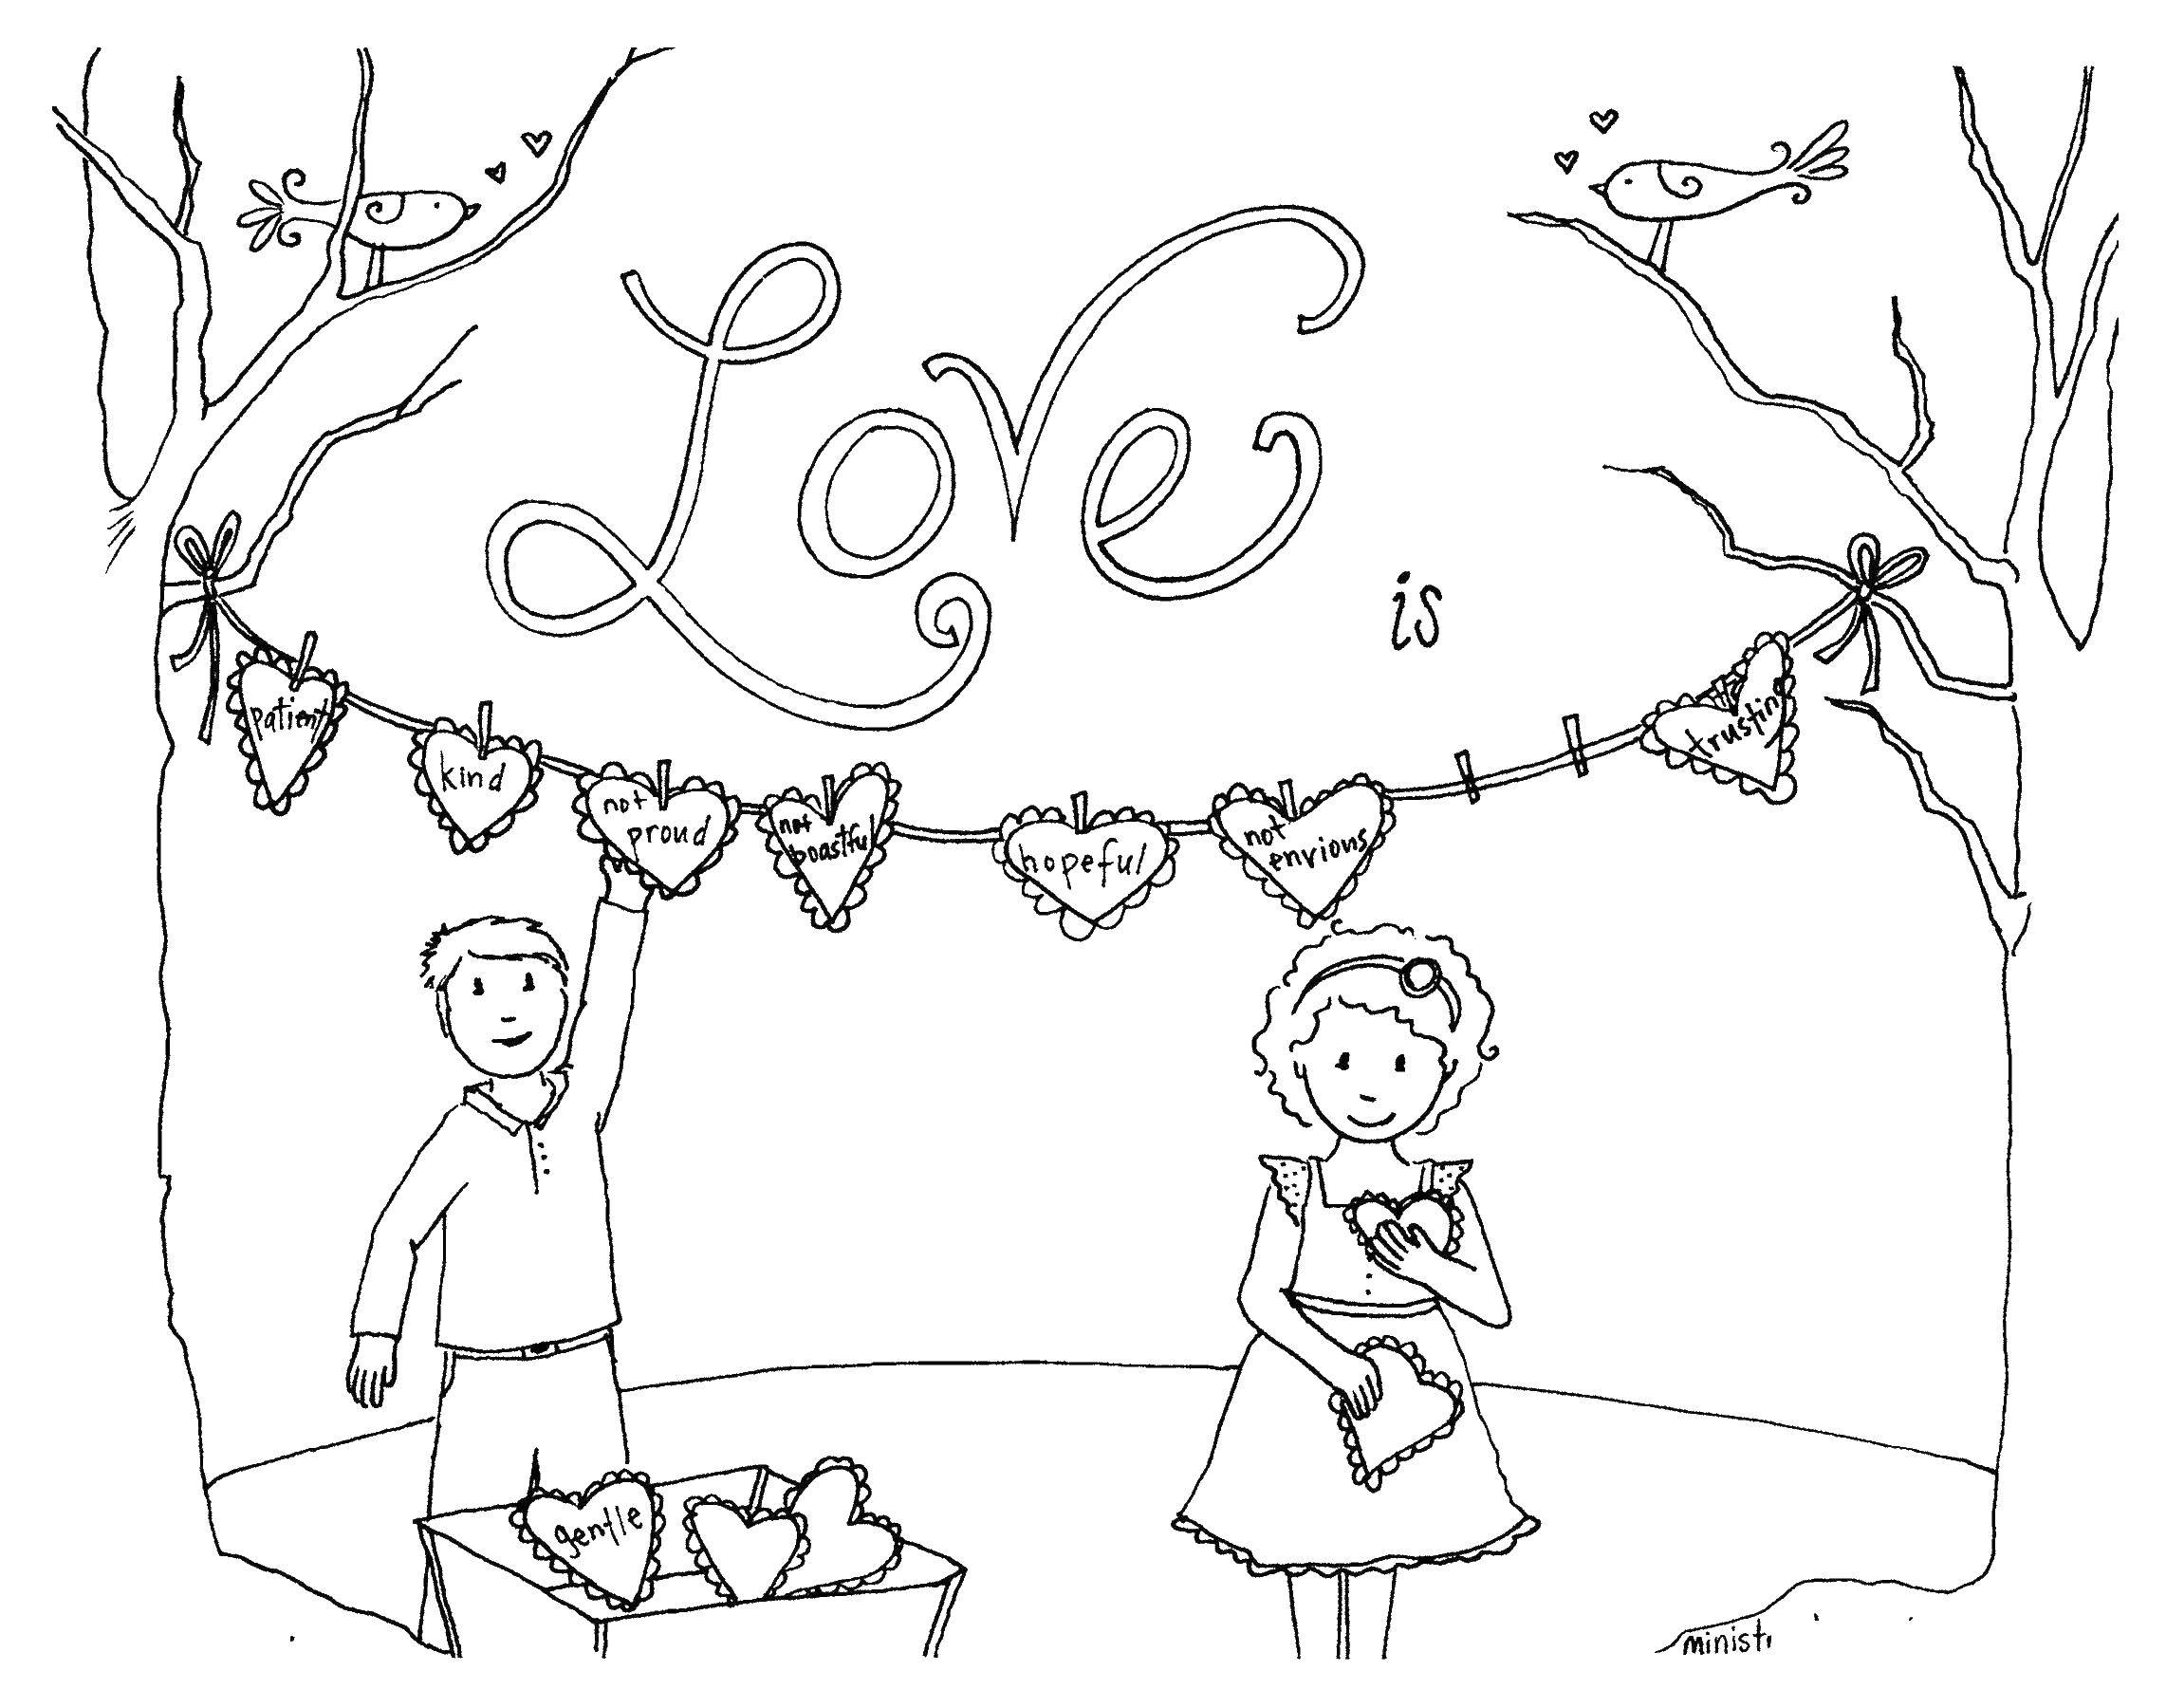 Coloring Love it.... Category I love you. Tags:  Recognition, love, heart.